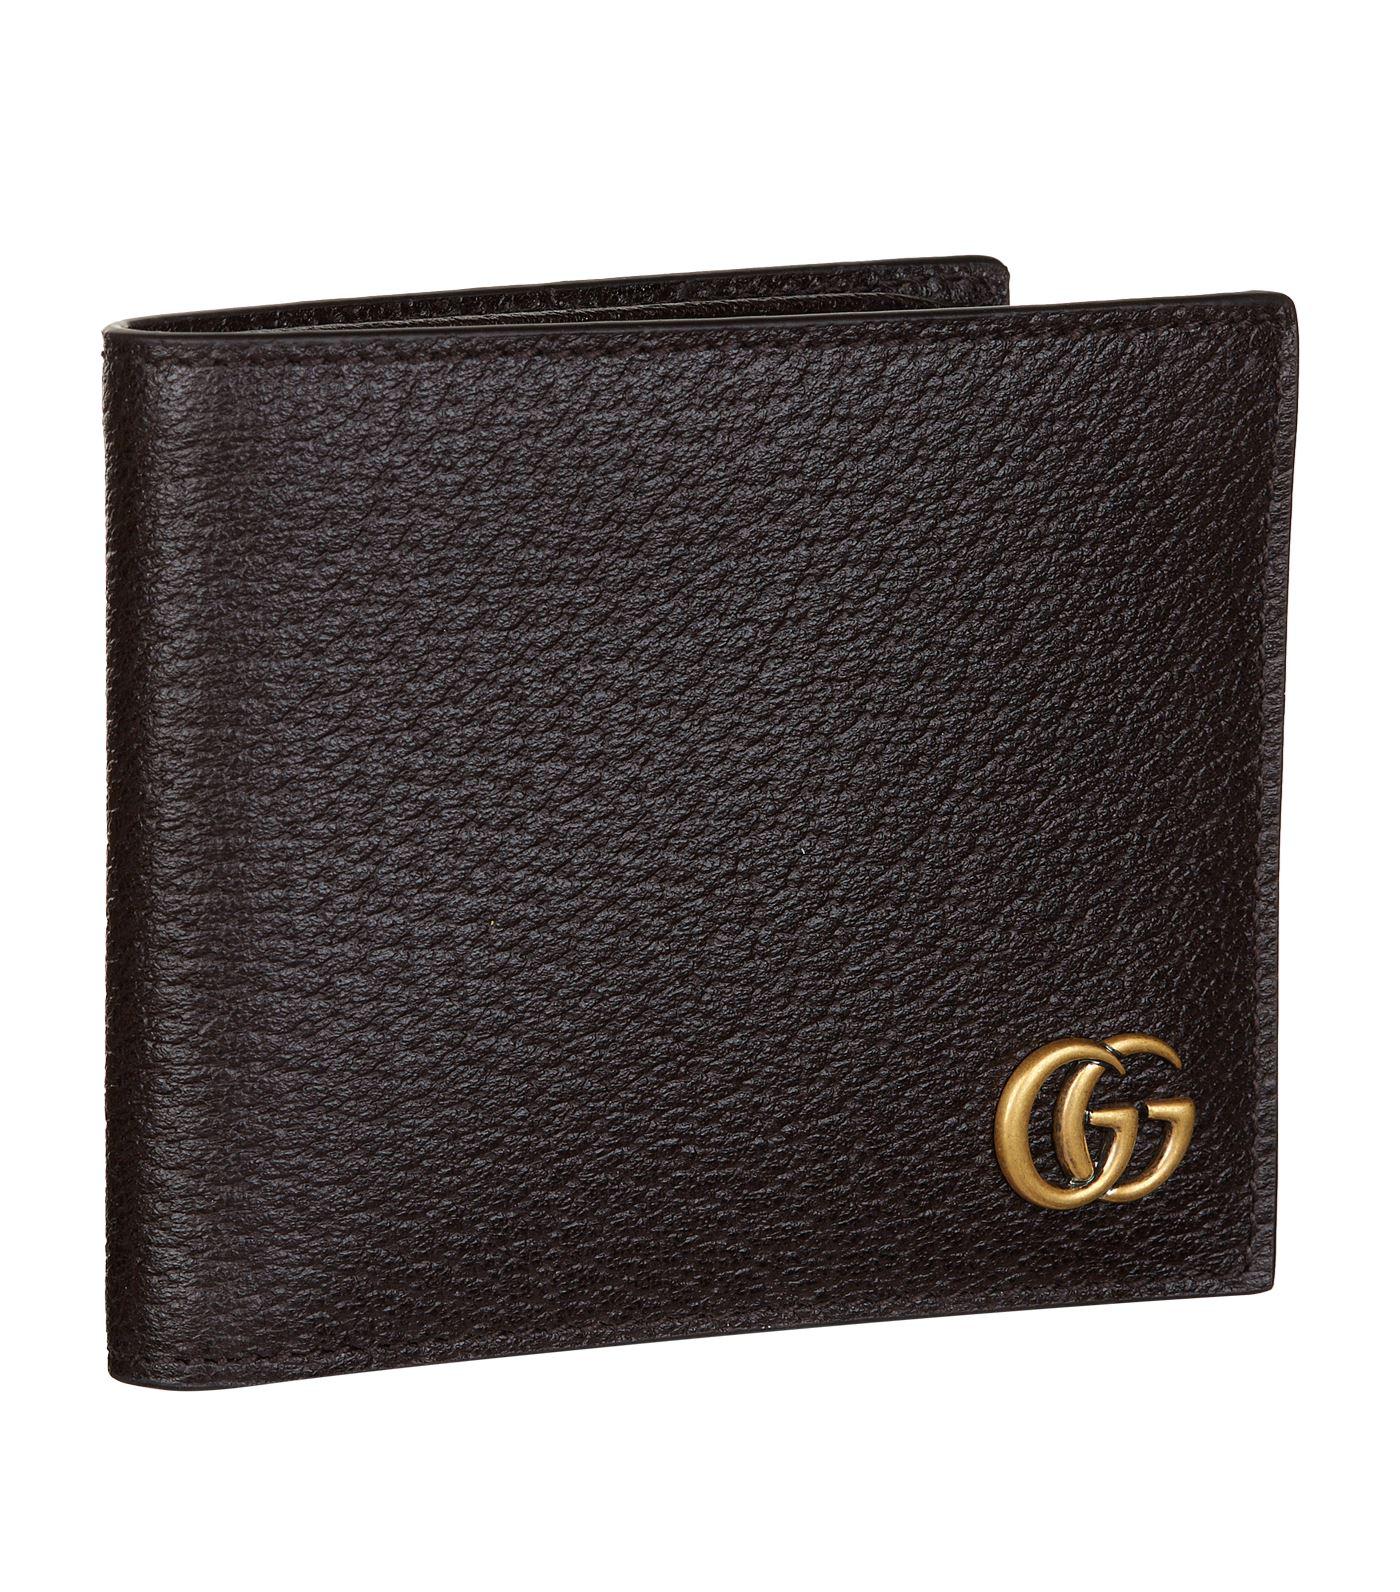 Lyst Gucci  Marmont Bifold Wallet  in Brown for Men 